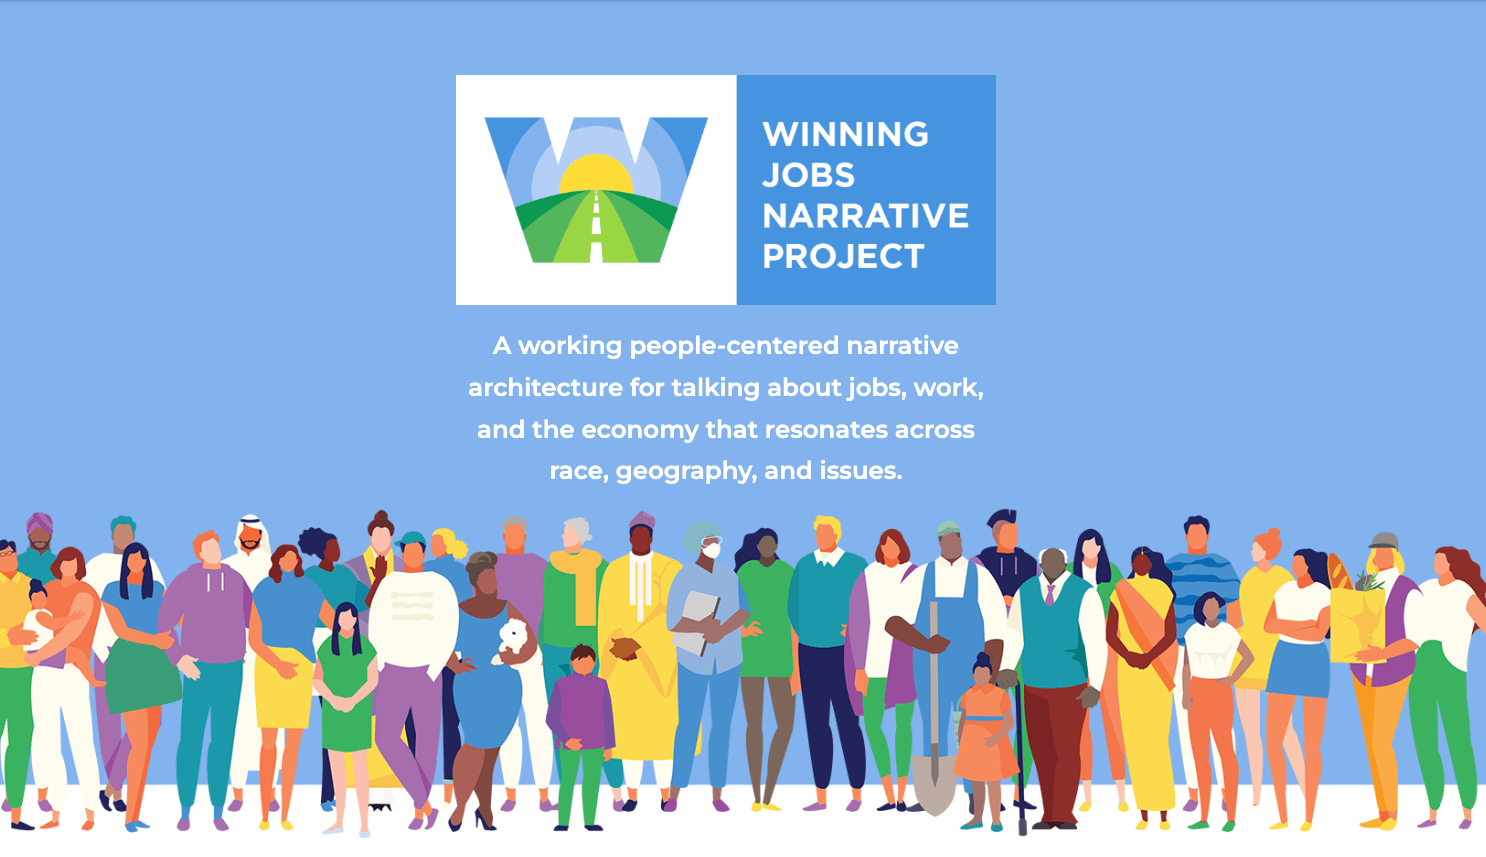 Winning Jobs Narrative Project, A working people-centered narrative architecture for talking about jobs, work, and the economy that resonates across race, geography, and issues